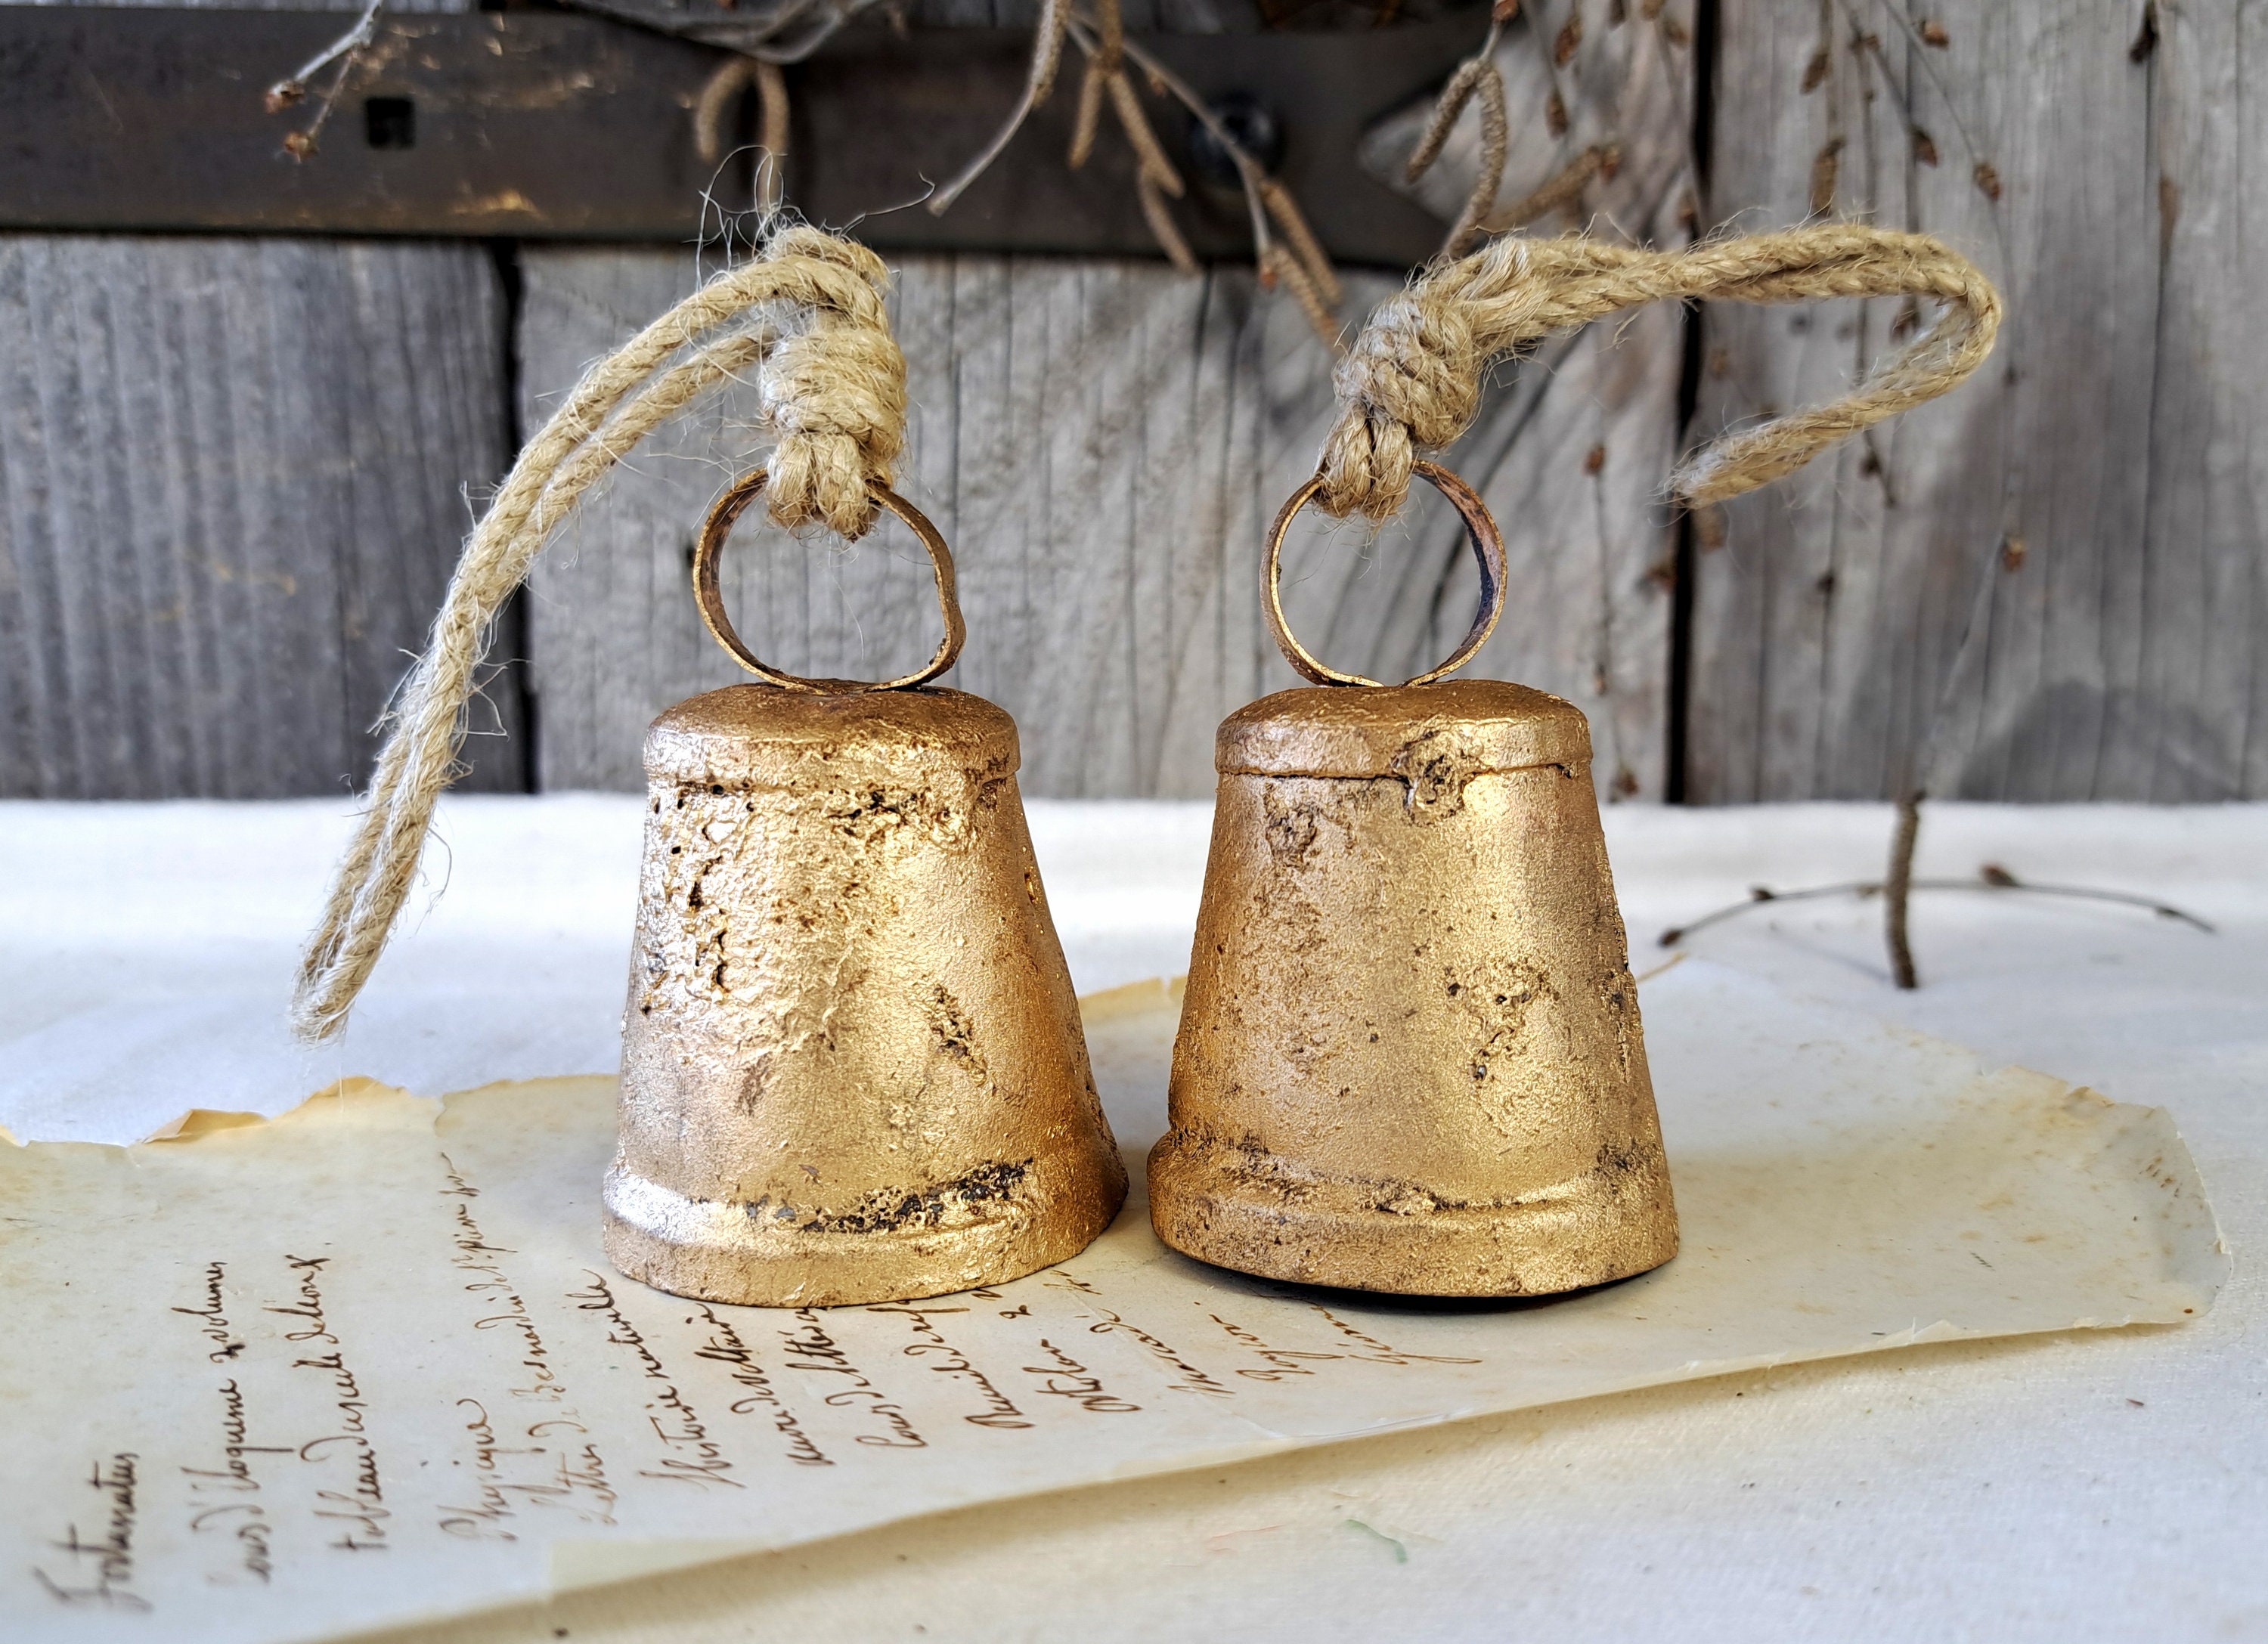 20 Pieces Craft Bells Small Brass Bells For Crafts Vintage Bells With  Spring Hooks For Hanging Wind Chimes Making Dog Training Doorbell Wedding  Decor